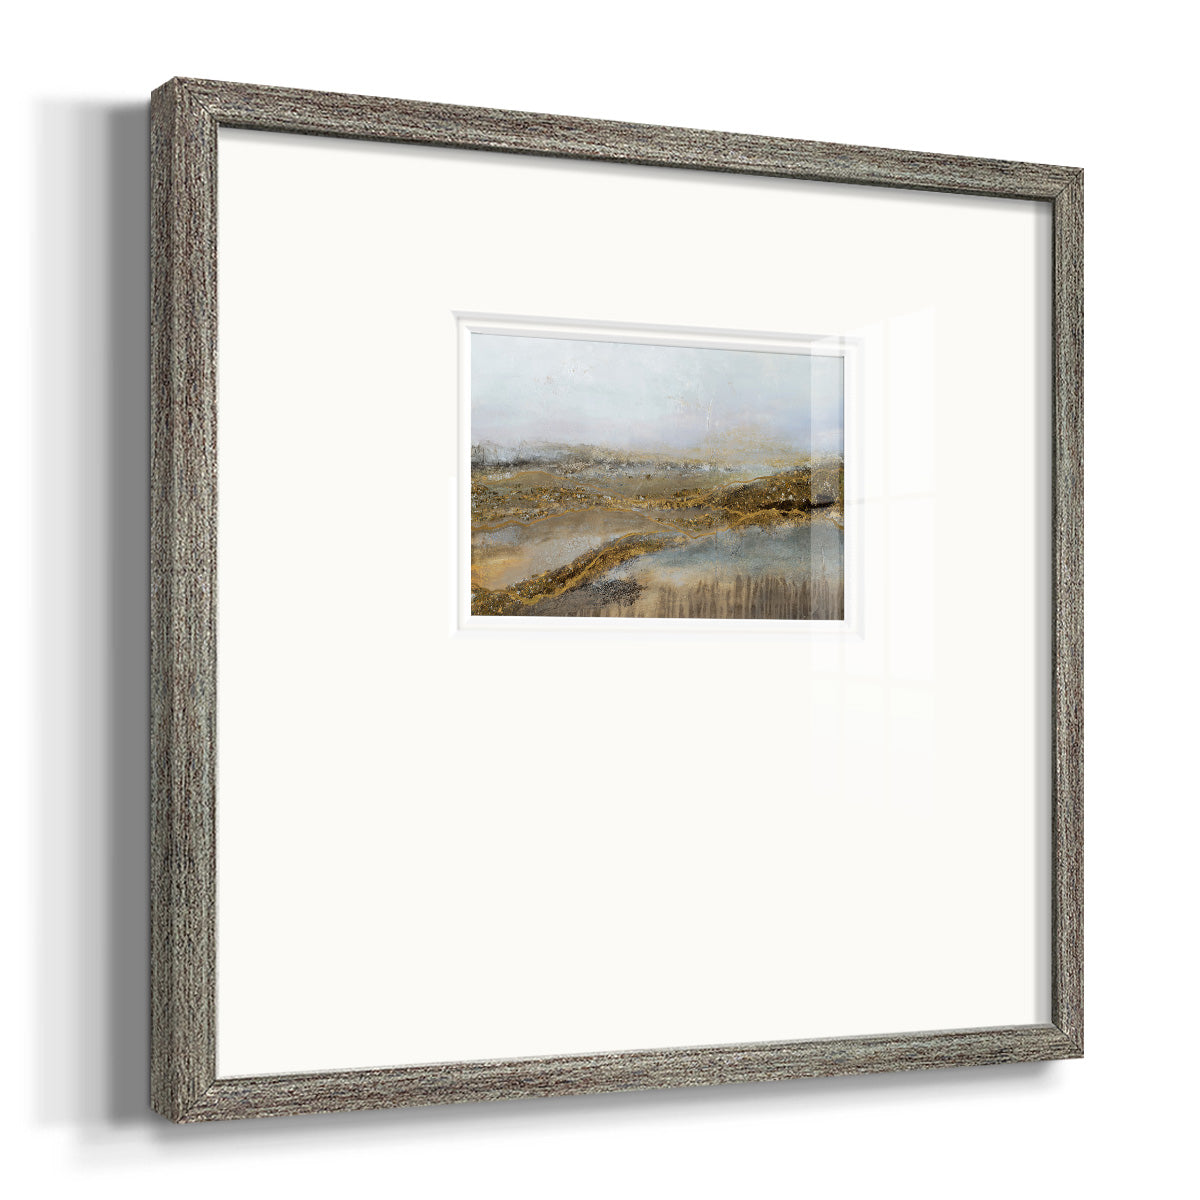 Where Are We Going? Premium Framed Print Double Matboard